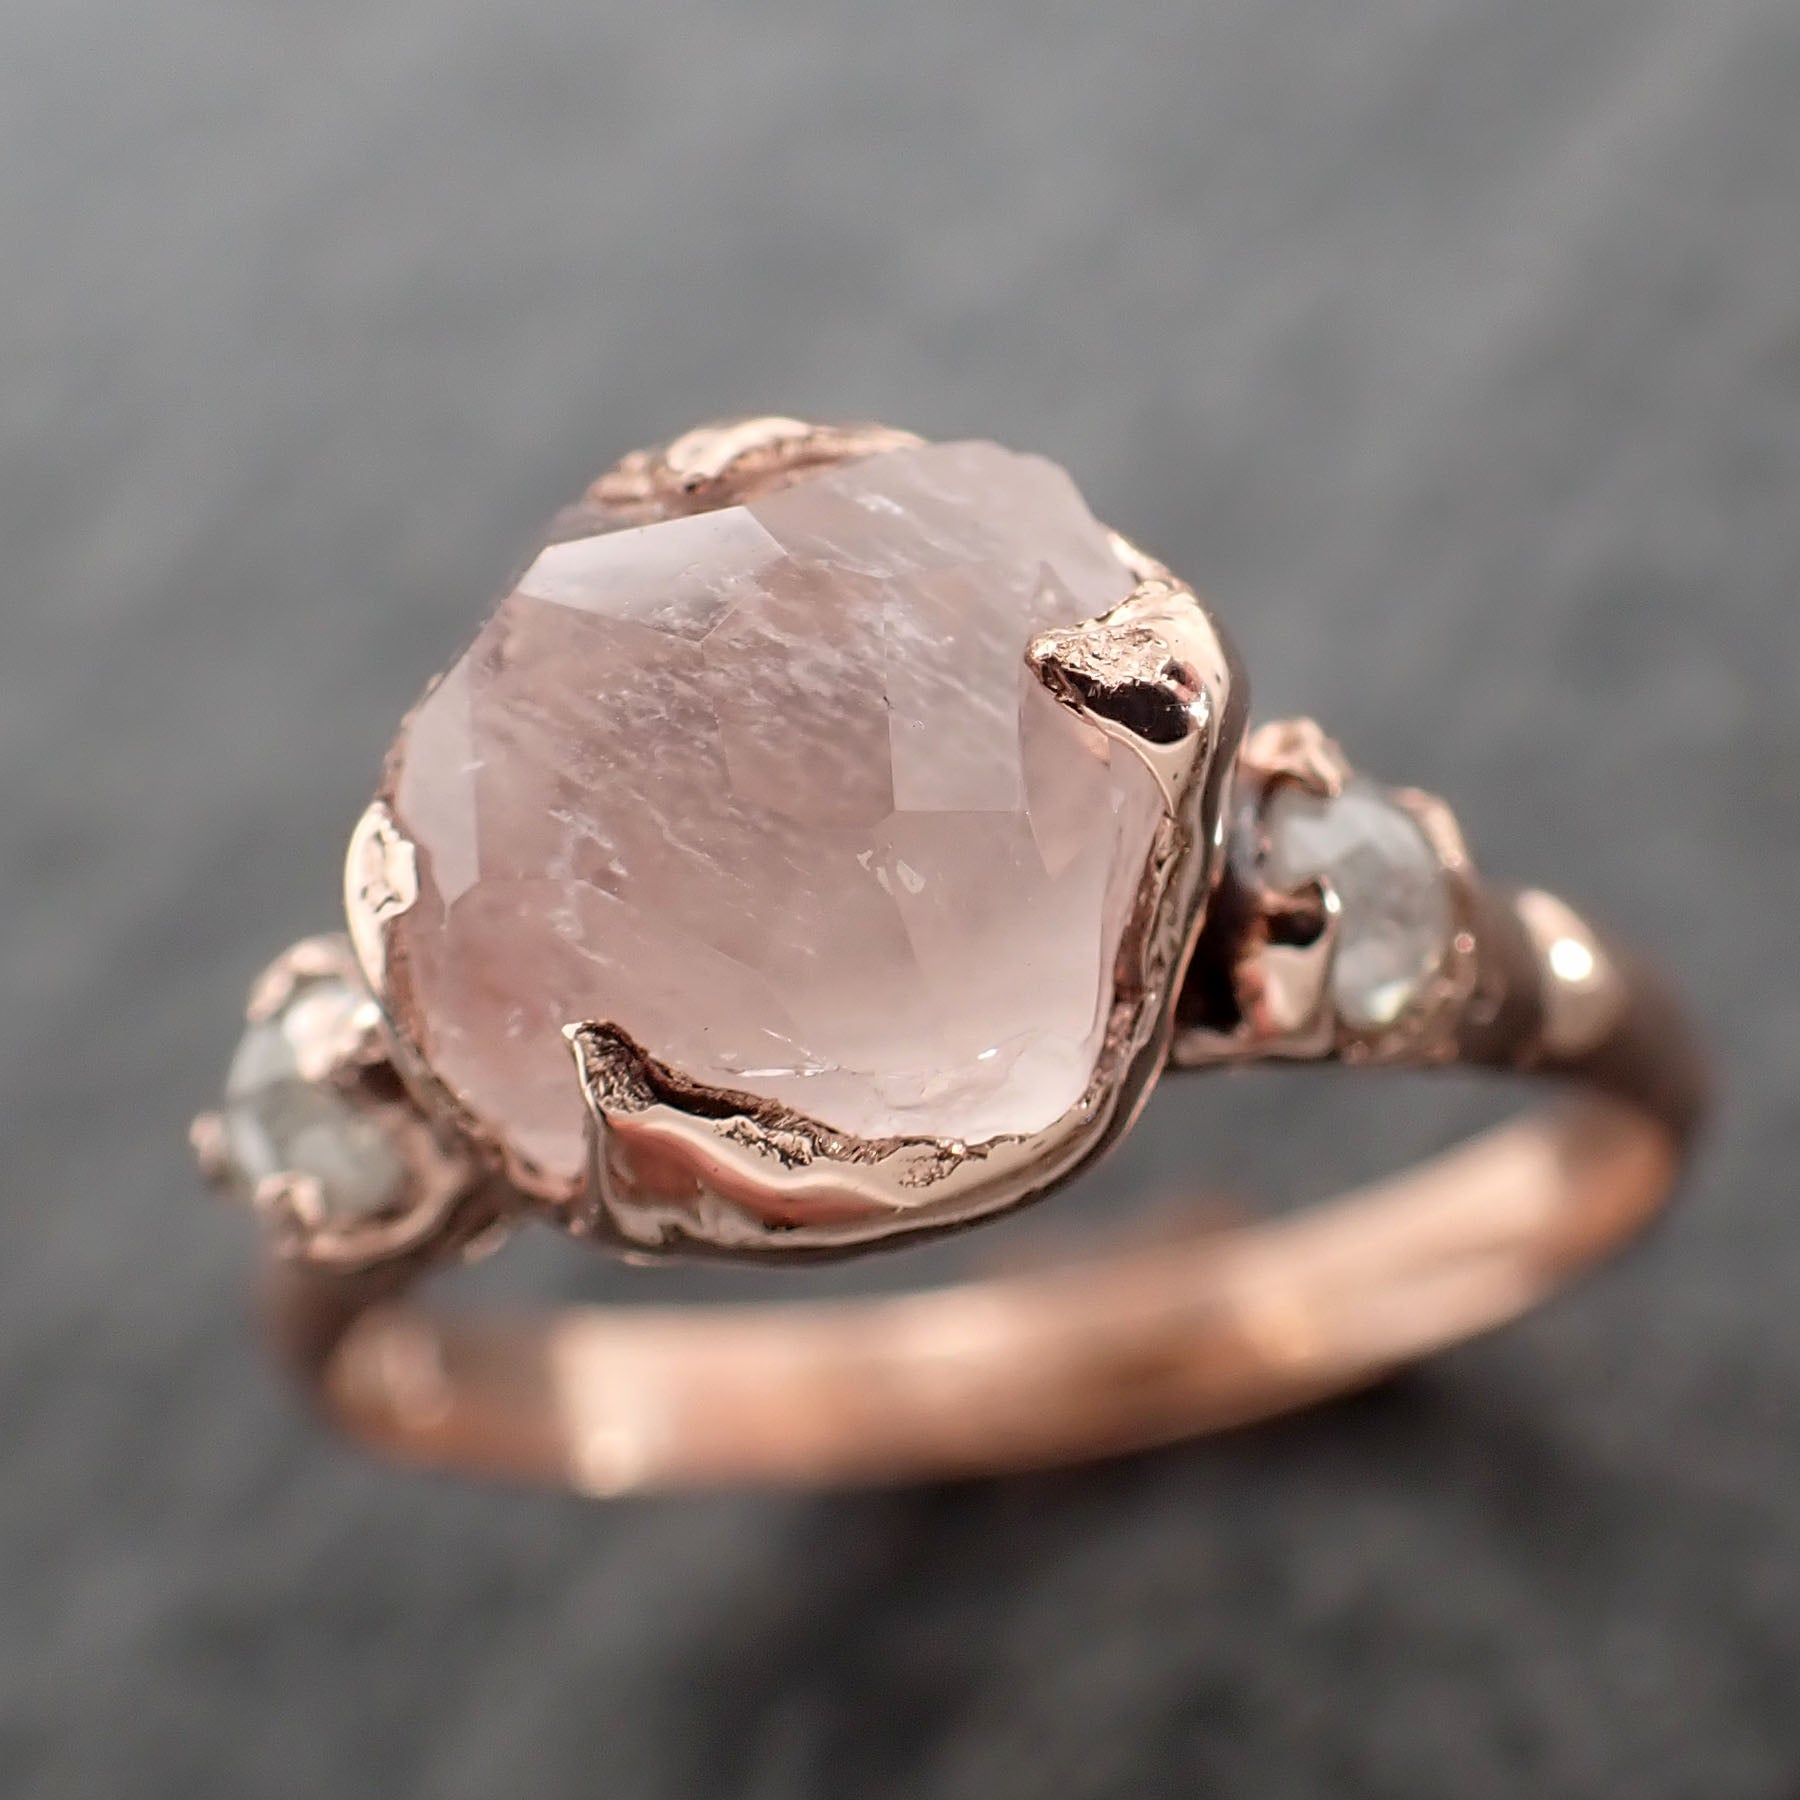 Partially Faceted Morganite Diamond 14k Rose Gold Engagement Ring Multi stone Wedding Ring Custom One Of a Kind Gemstone Ring Bespoke Pink Conflict Free by Angeline 2533